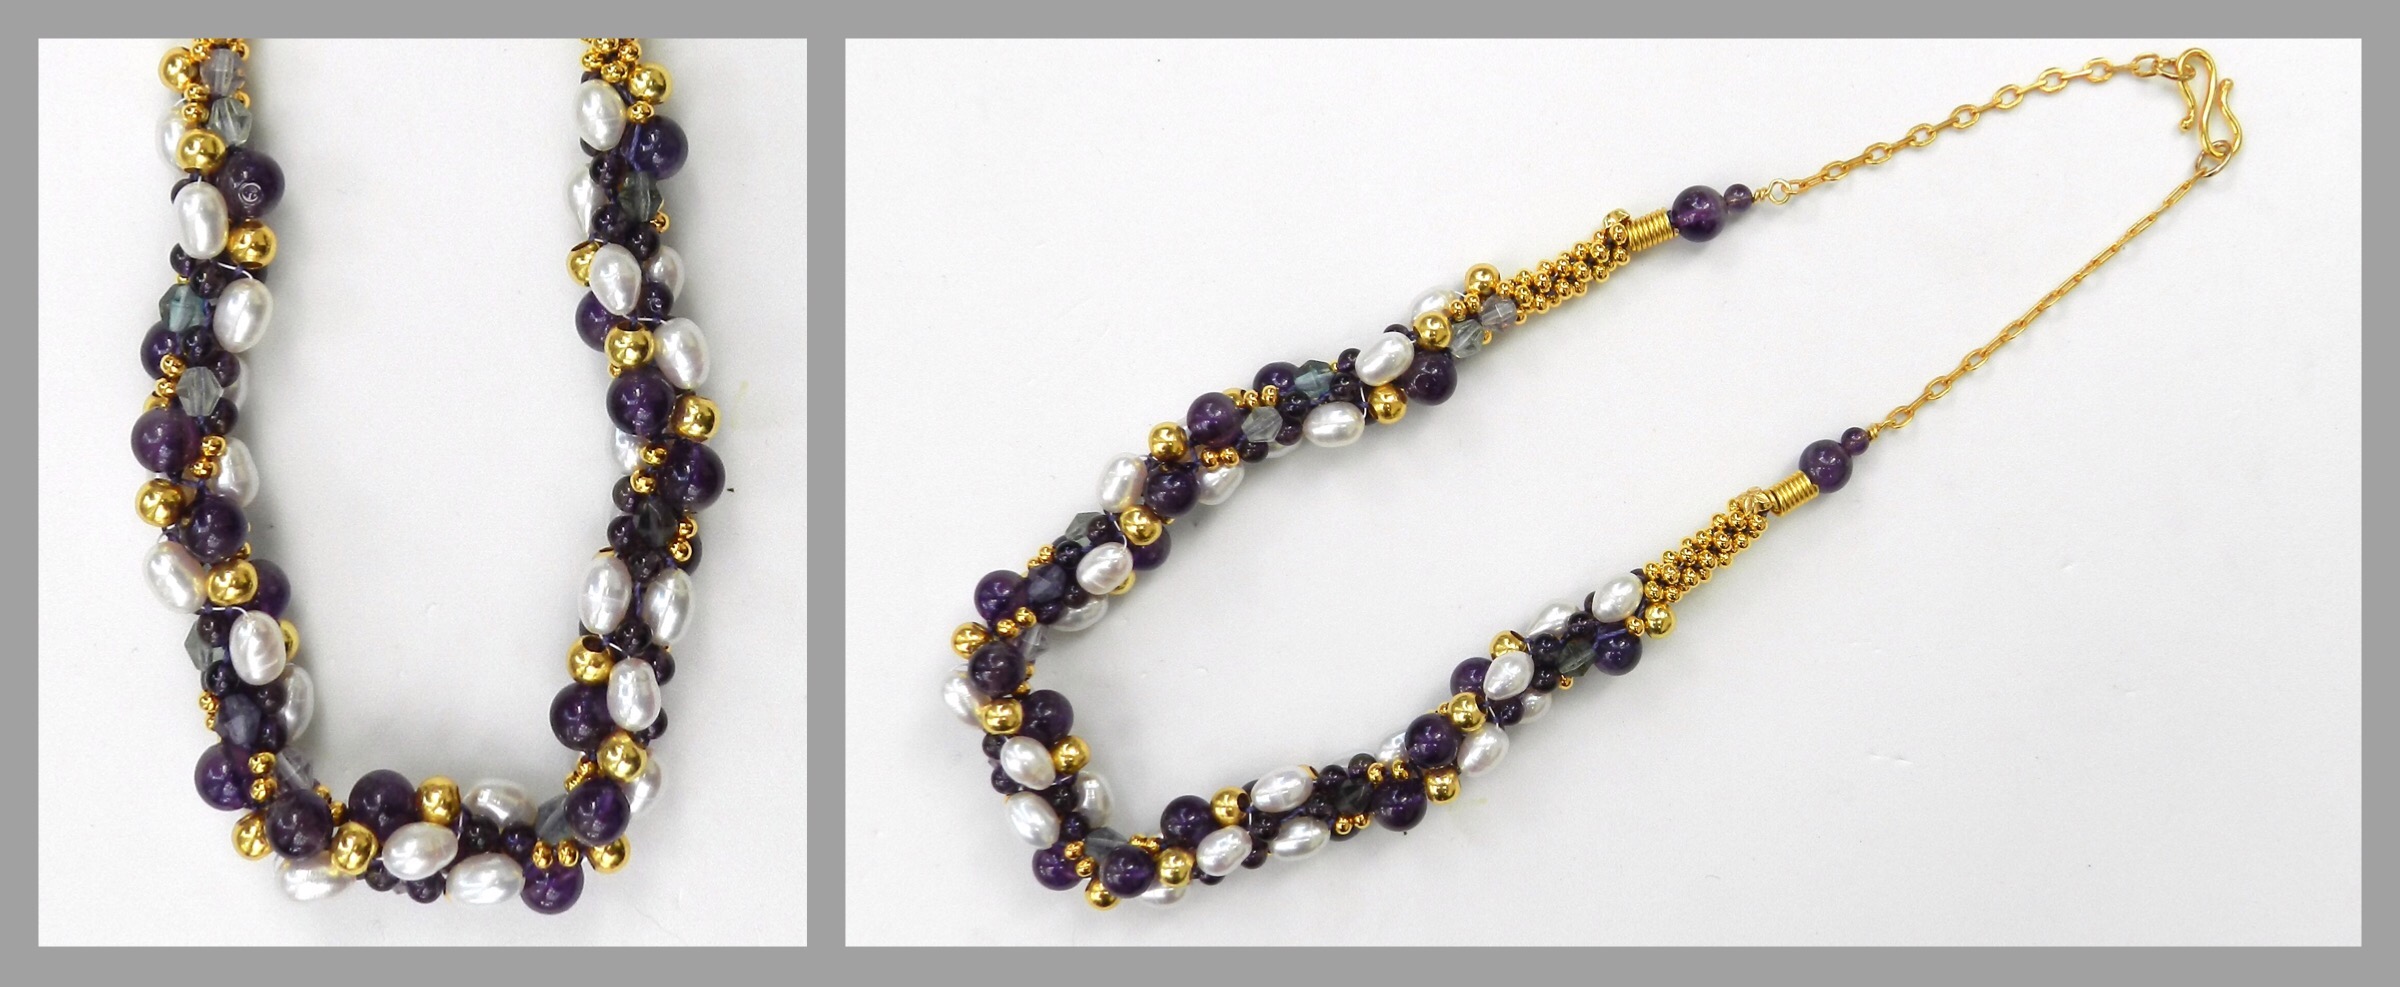 Bicones, Pearls and Amethyst - Prumihimo